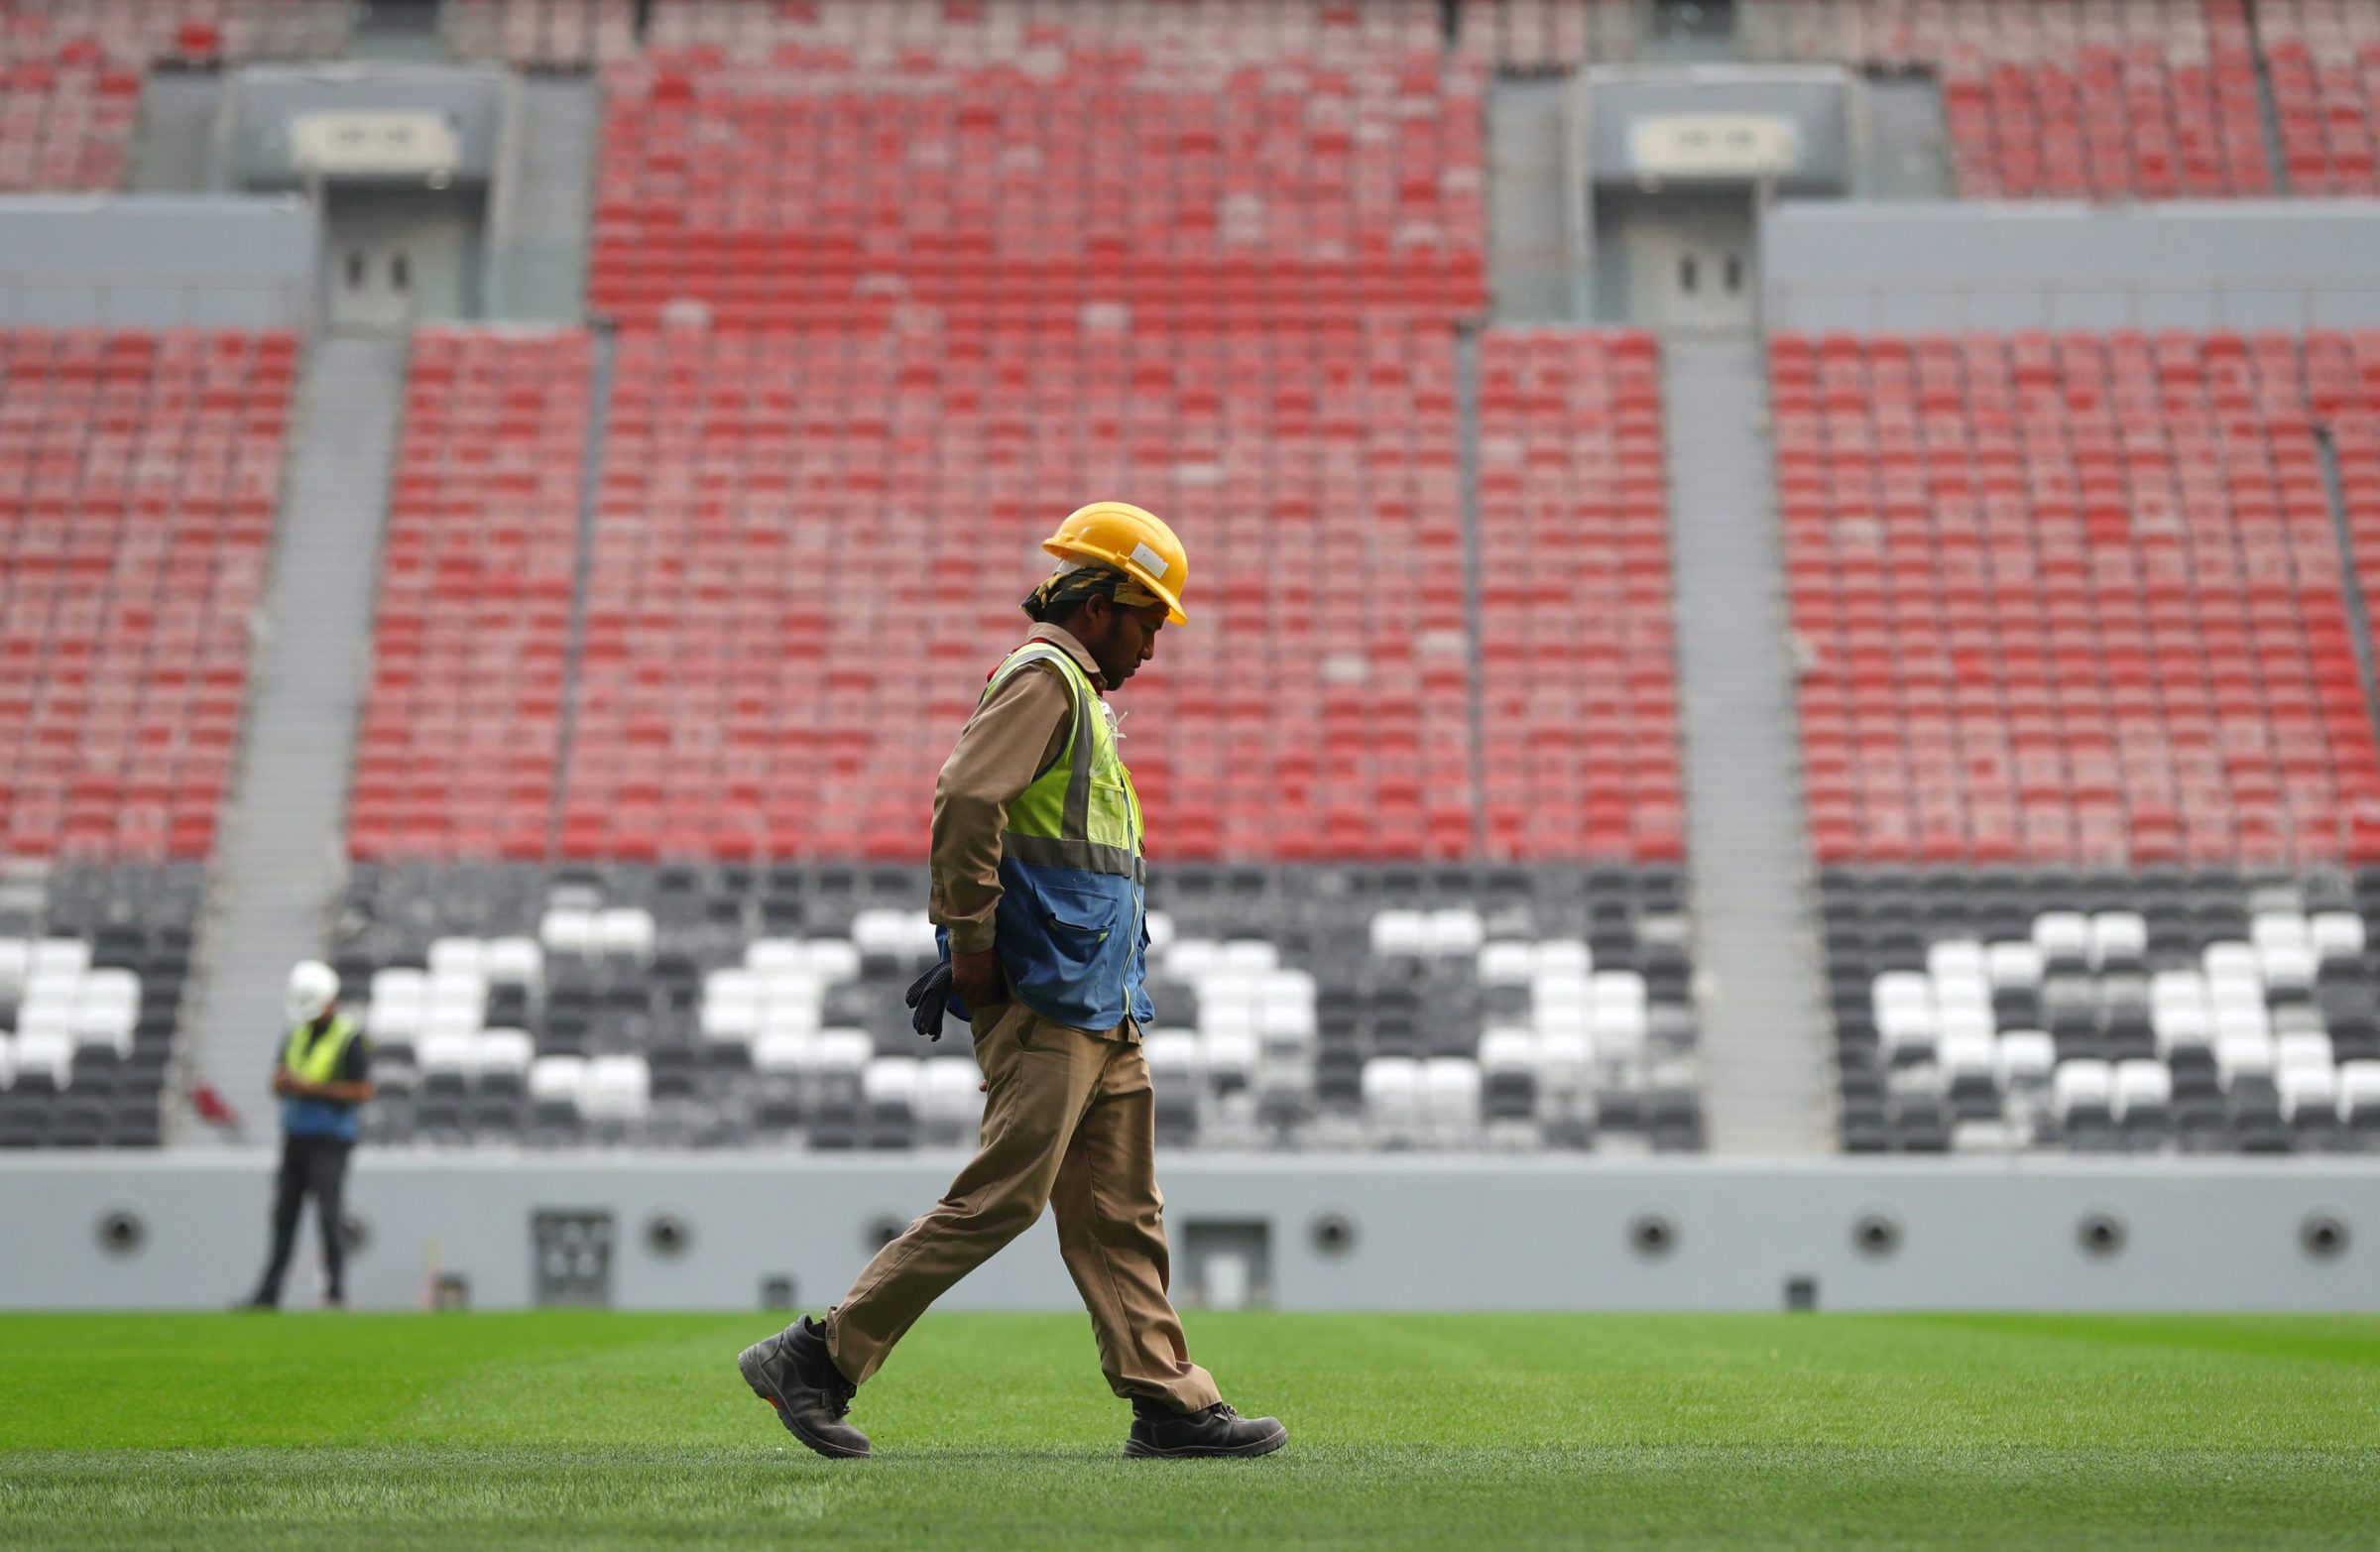 A laborer walks on the field in one of the new stadiums Qatar has constructed for the 2022 World Cup.